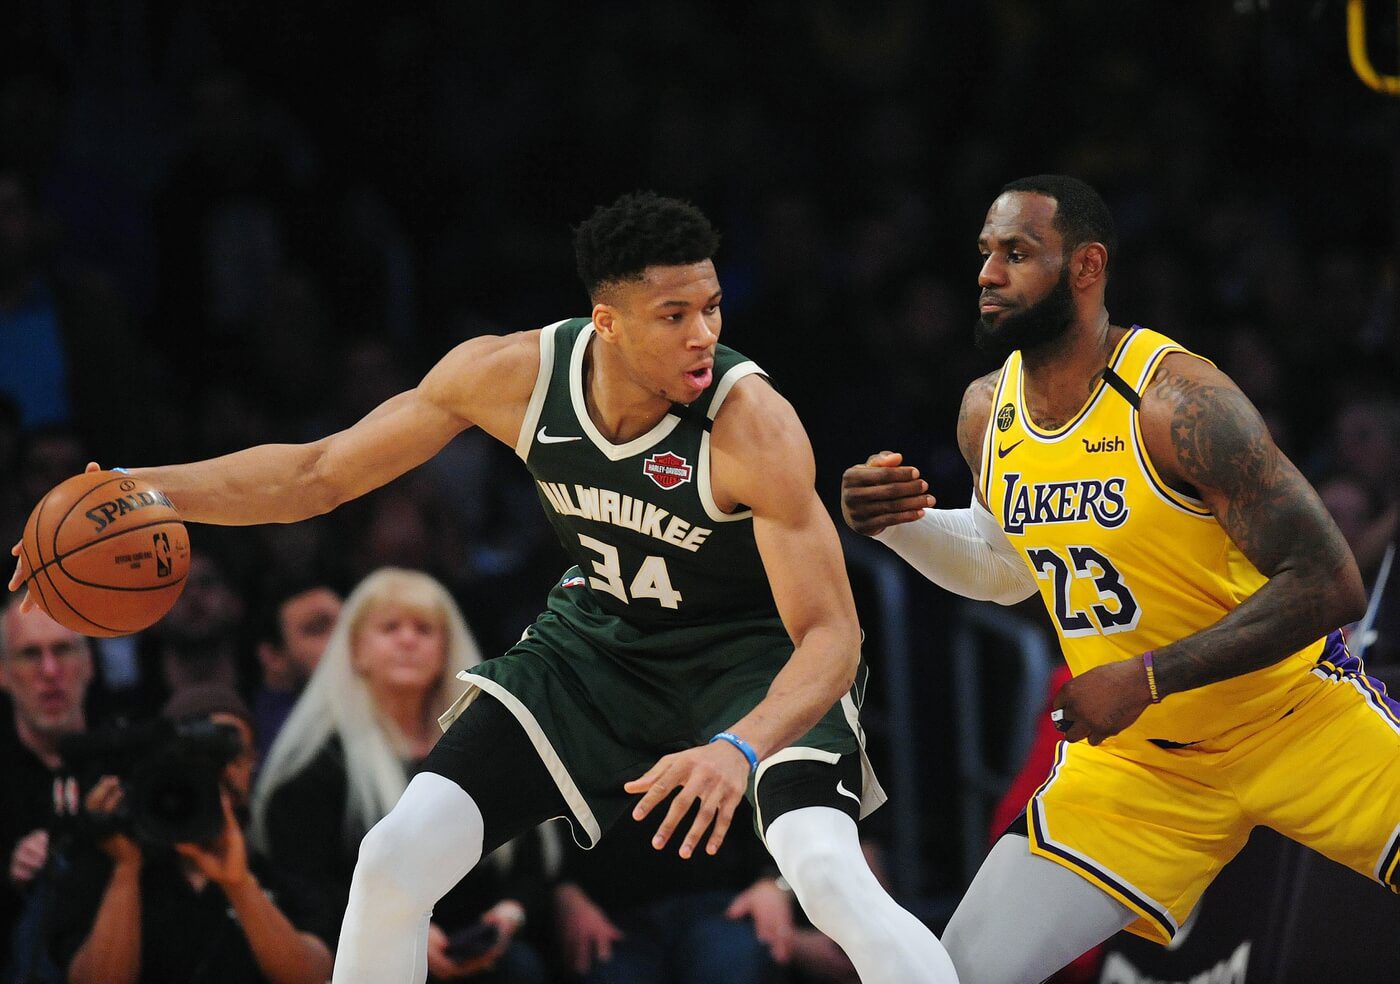 March 6, 2020; Los Angeles, California, USA; Milwaukee Bucks forward Giannis Antetokounmpo (34) controls the ball against Los Angeles Lakers forward LeBron James (23) during the first half at Staples Center. Mandatory Credit: Gary A. Vasquez-USA TODAY Sports